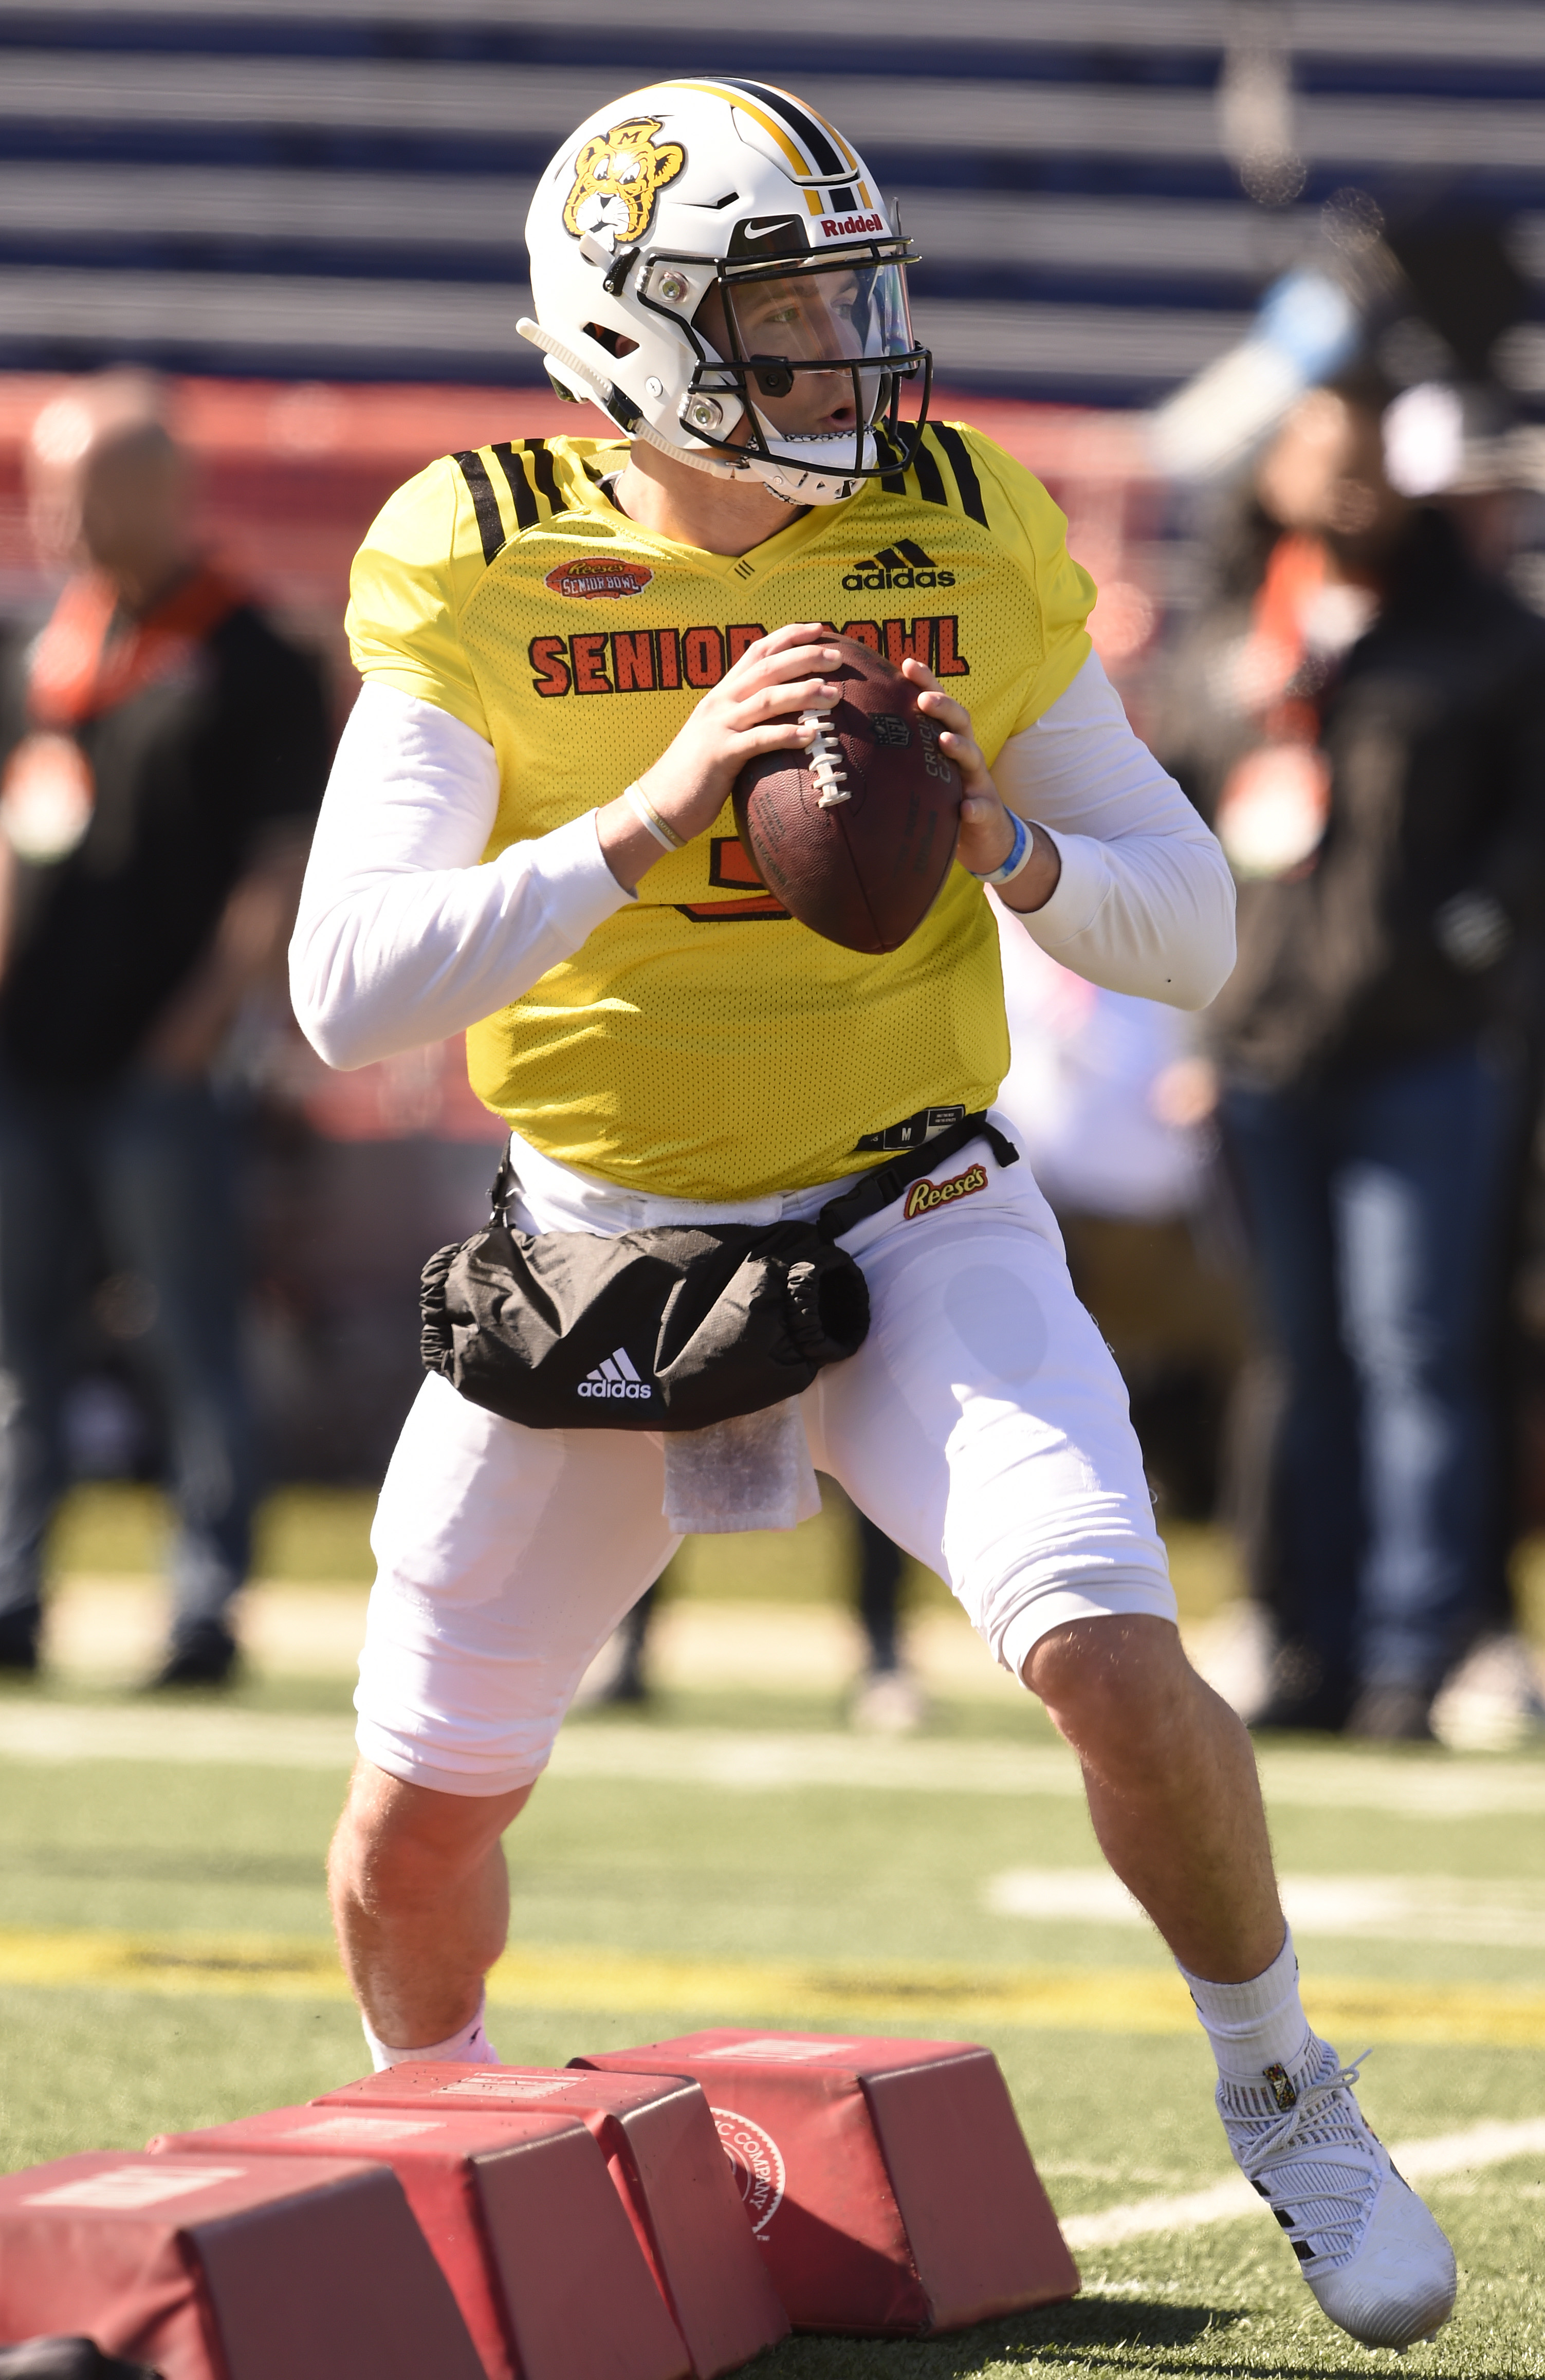 Drew Lock An Option For Packers?